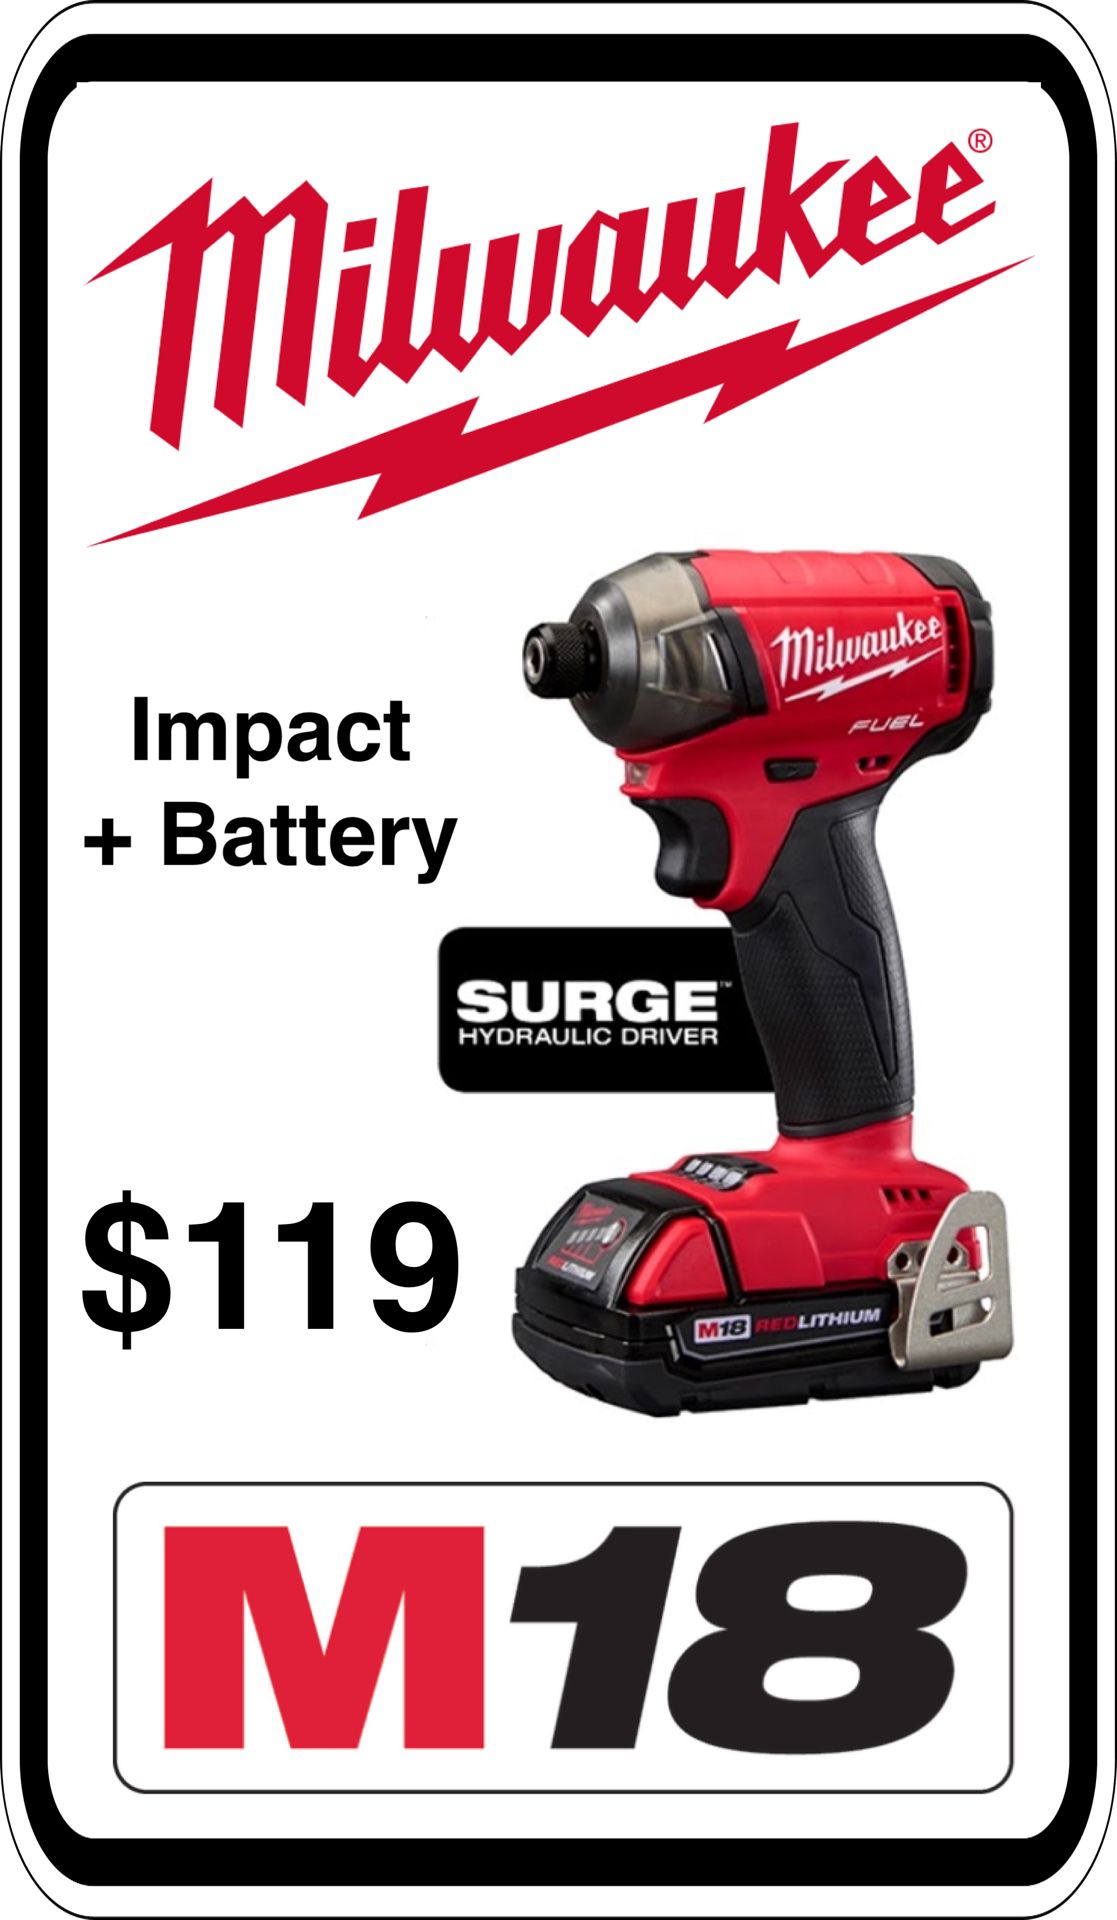 BRAND NEW - Milwaukee 2760-20 M18 Fuel Surge Impact - Includes NEW Battery - We accept trades & Credit Cards - AzBE Deals